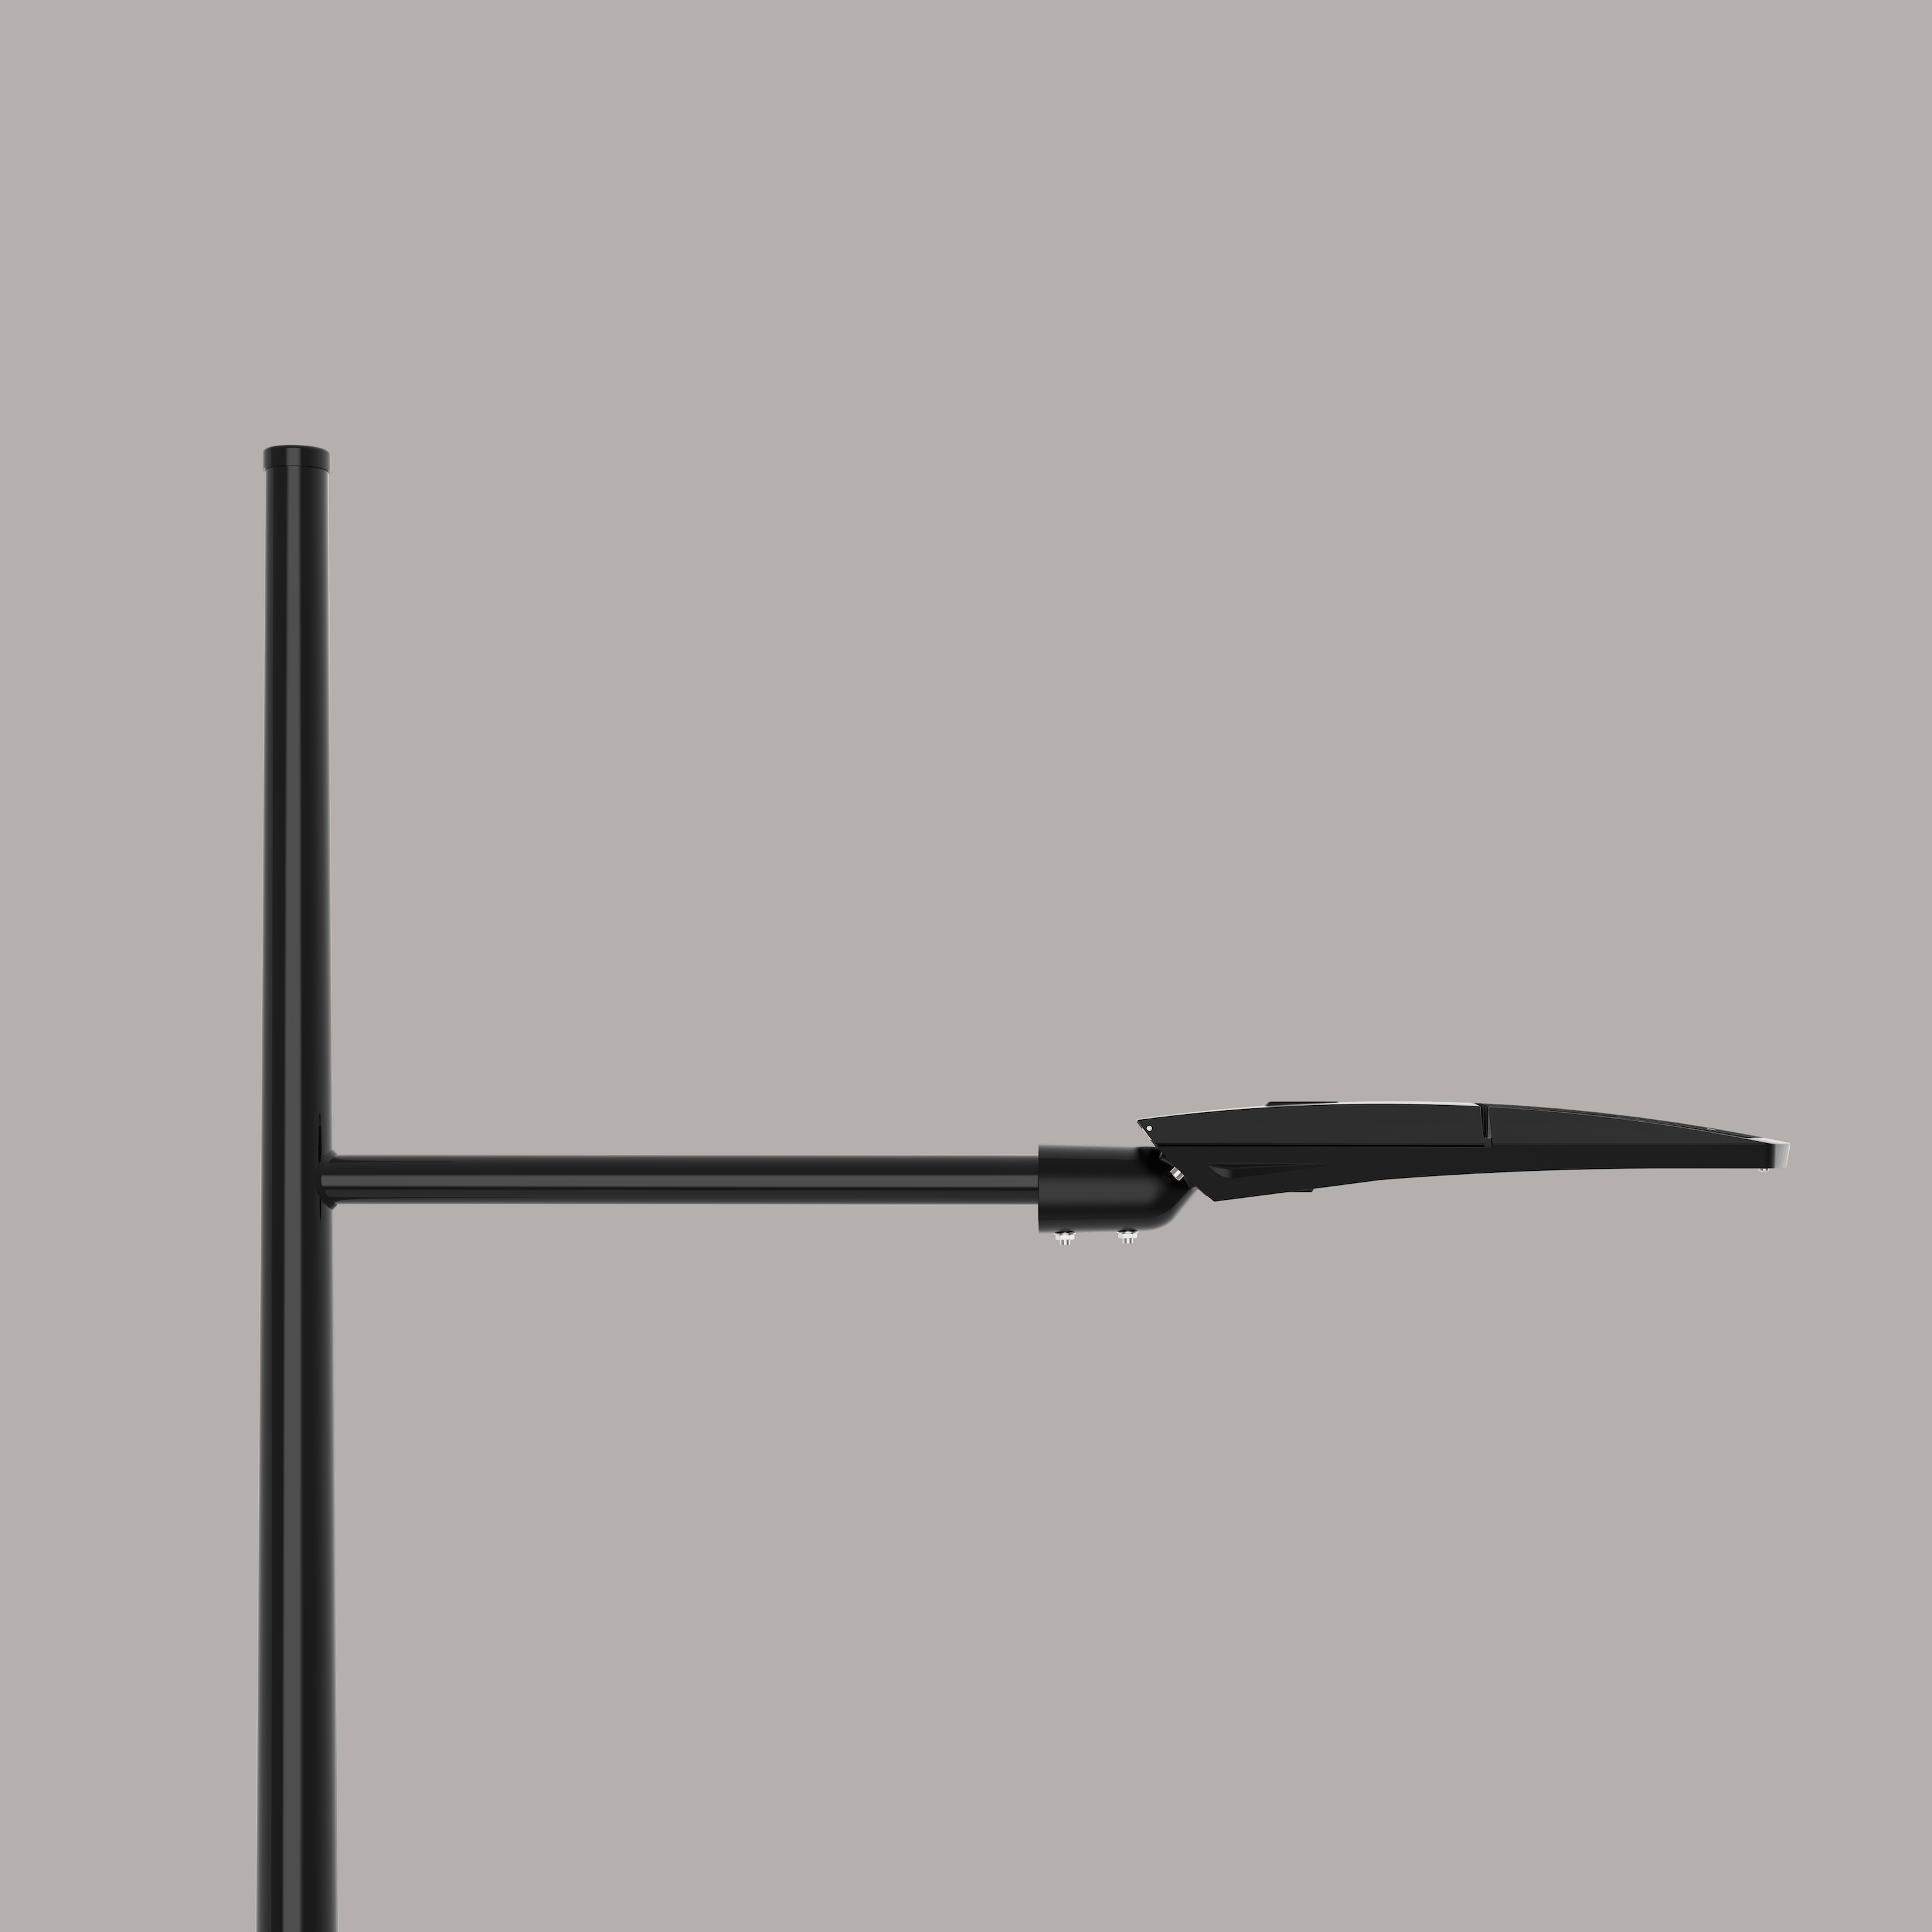 Discover the elegance and innovation of the Marlborough Column close up at ibex lighting.